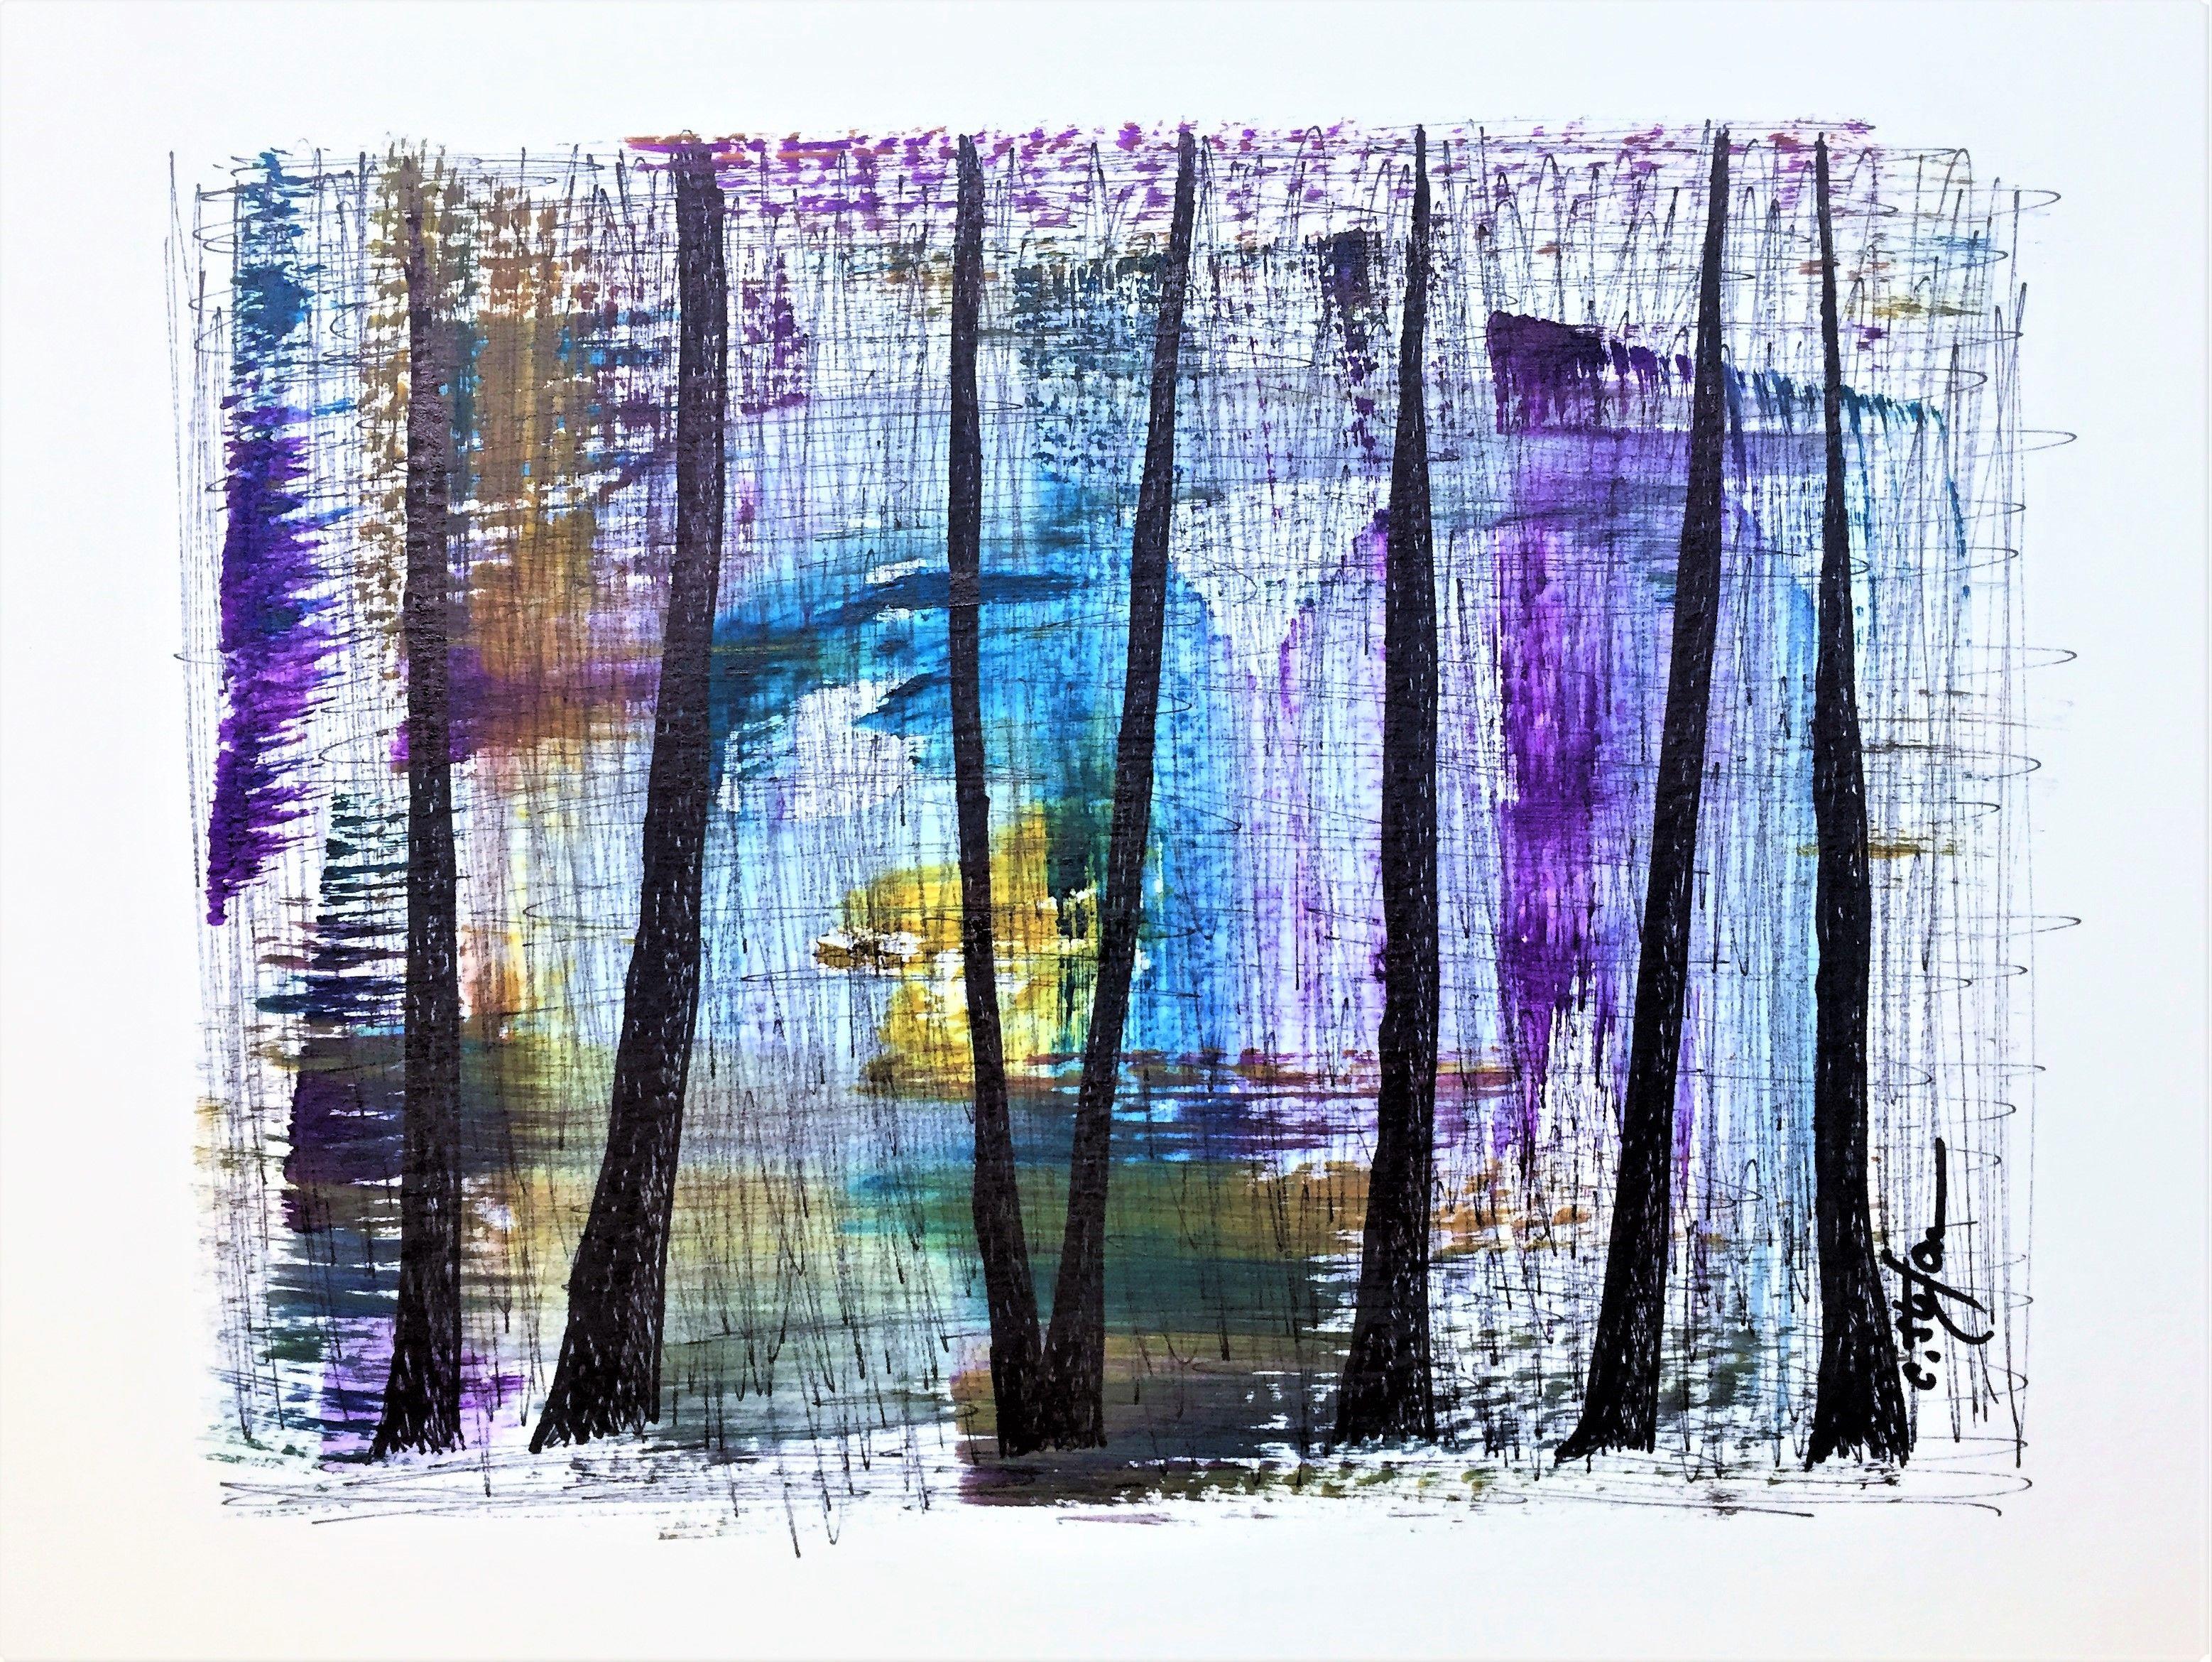 Abstract Wood #2, Mixed Media on Paper - Mixed Media Art by Cristina Stefan